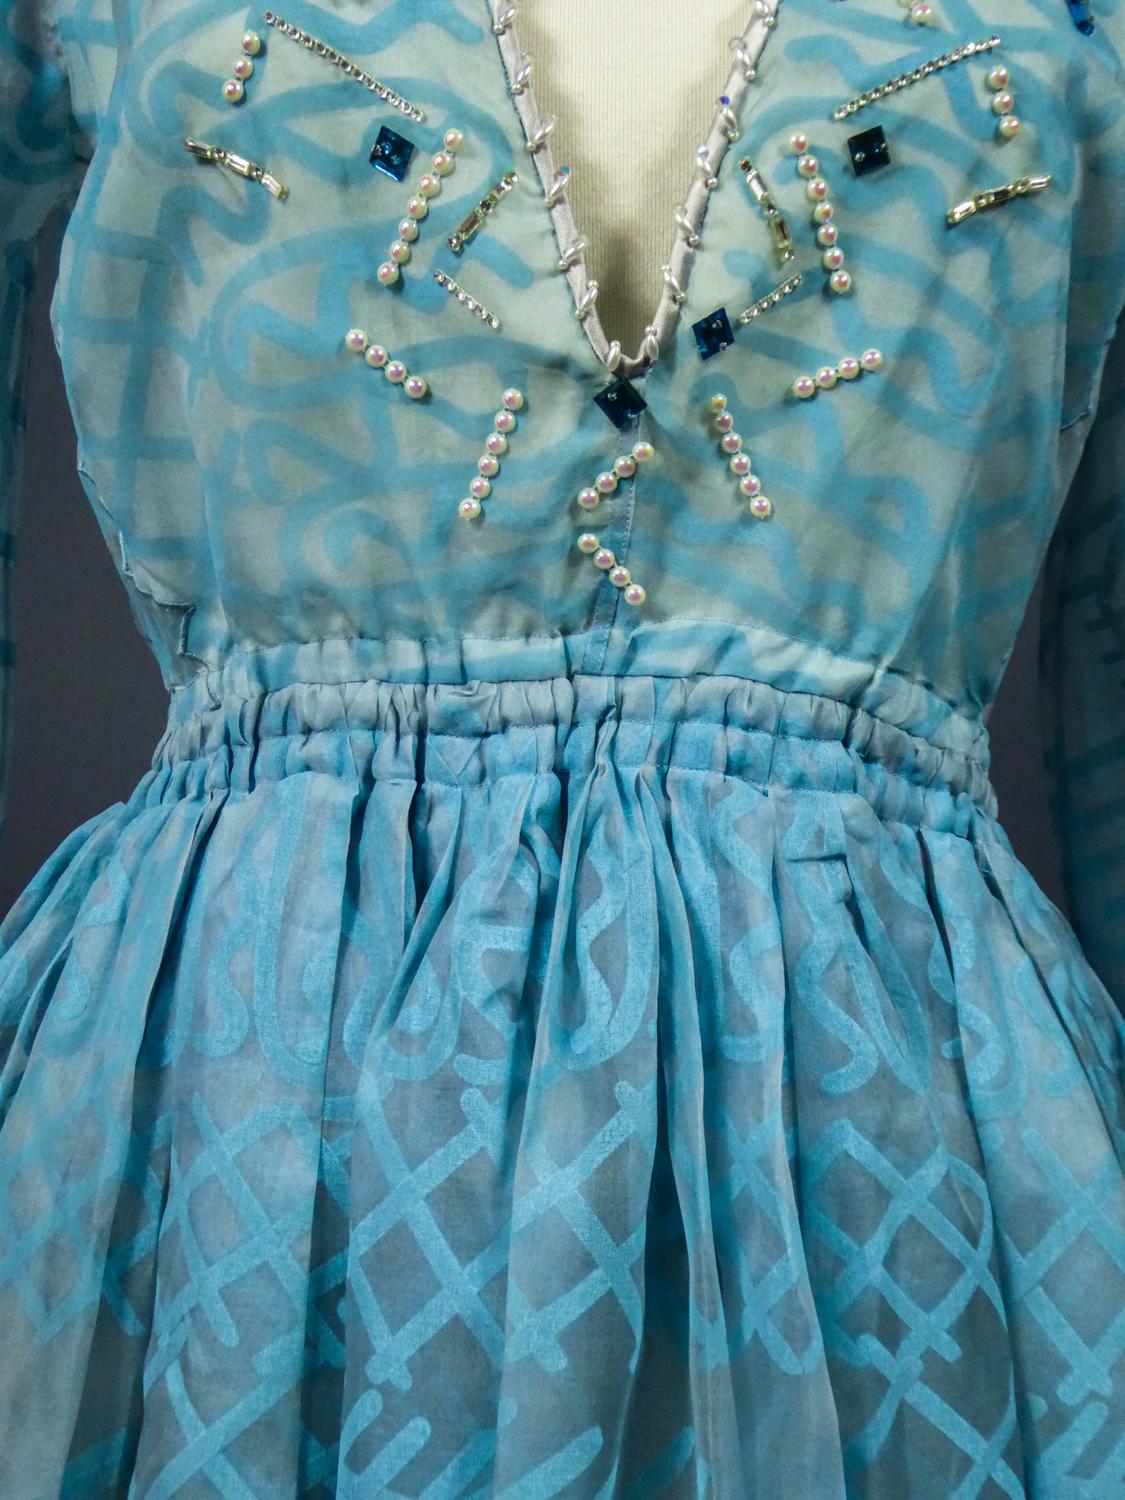 A Zandra Rhodes Evening Dress in Printed Organza - Fortuny Influence- Circa 1980 For Sale 3